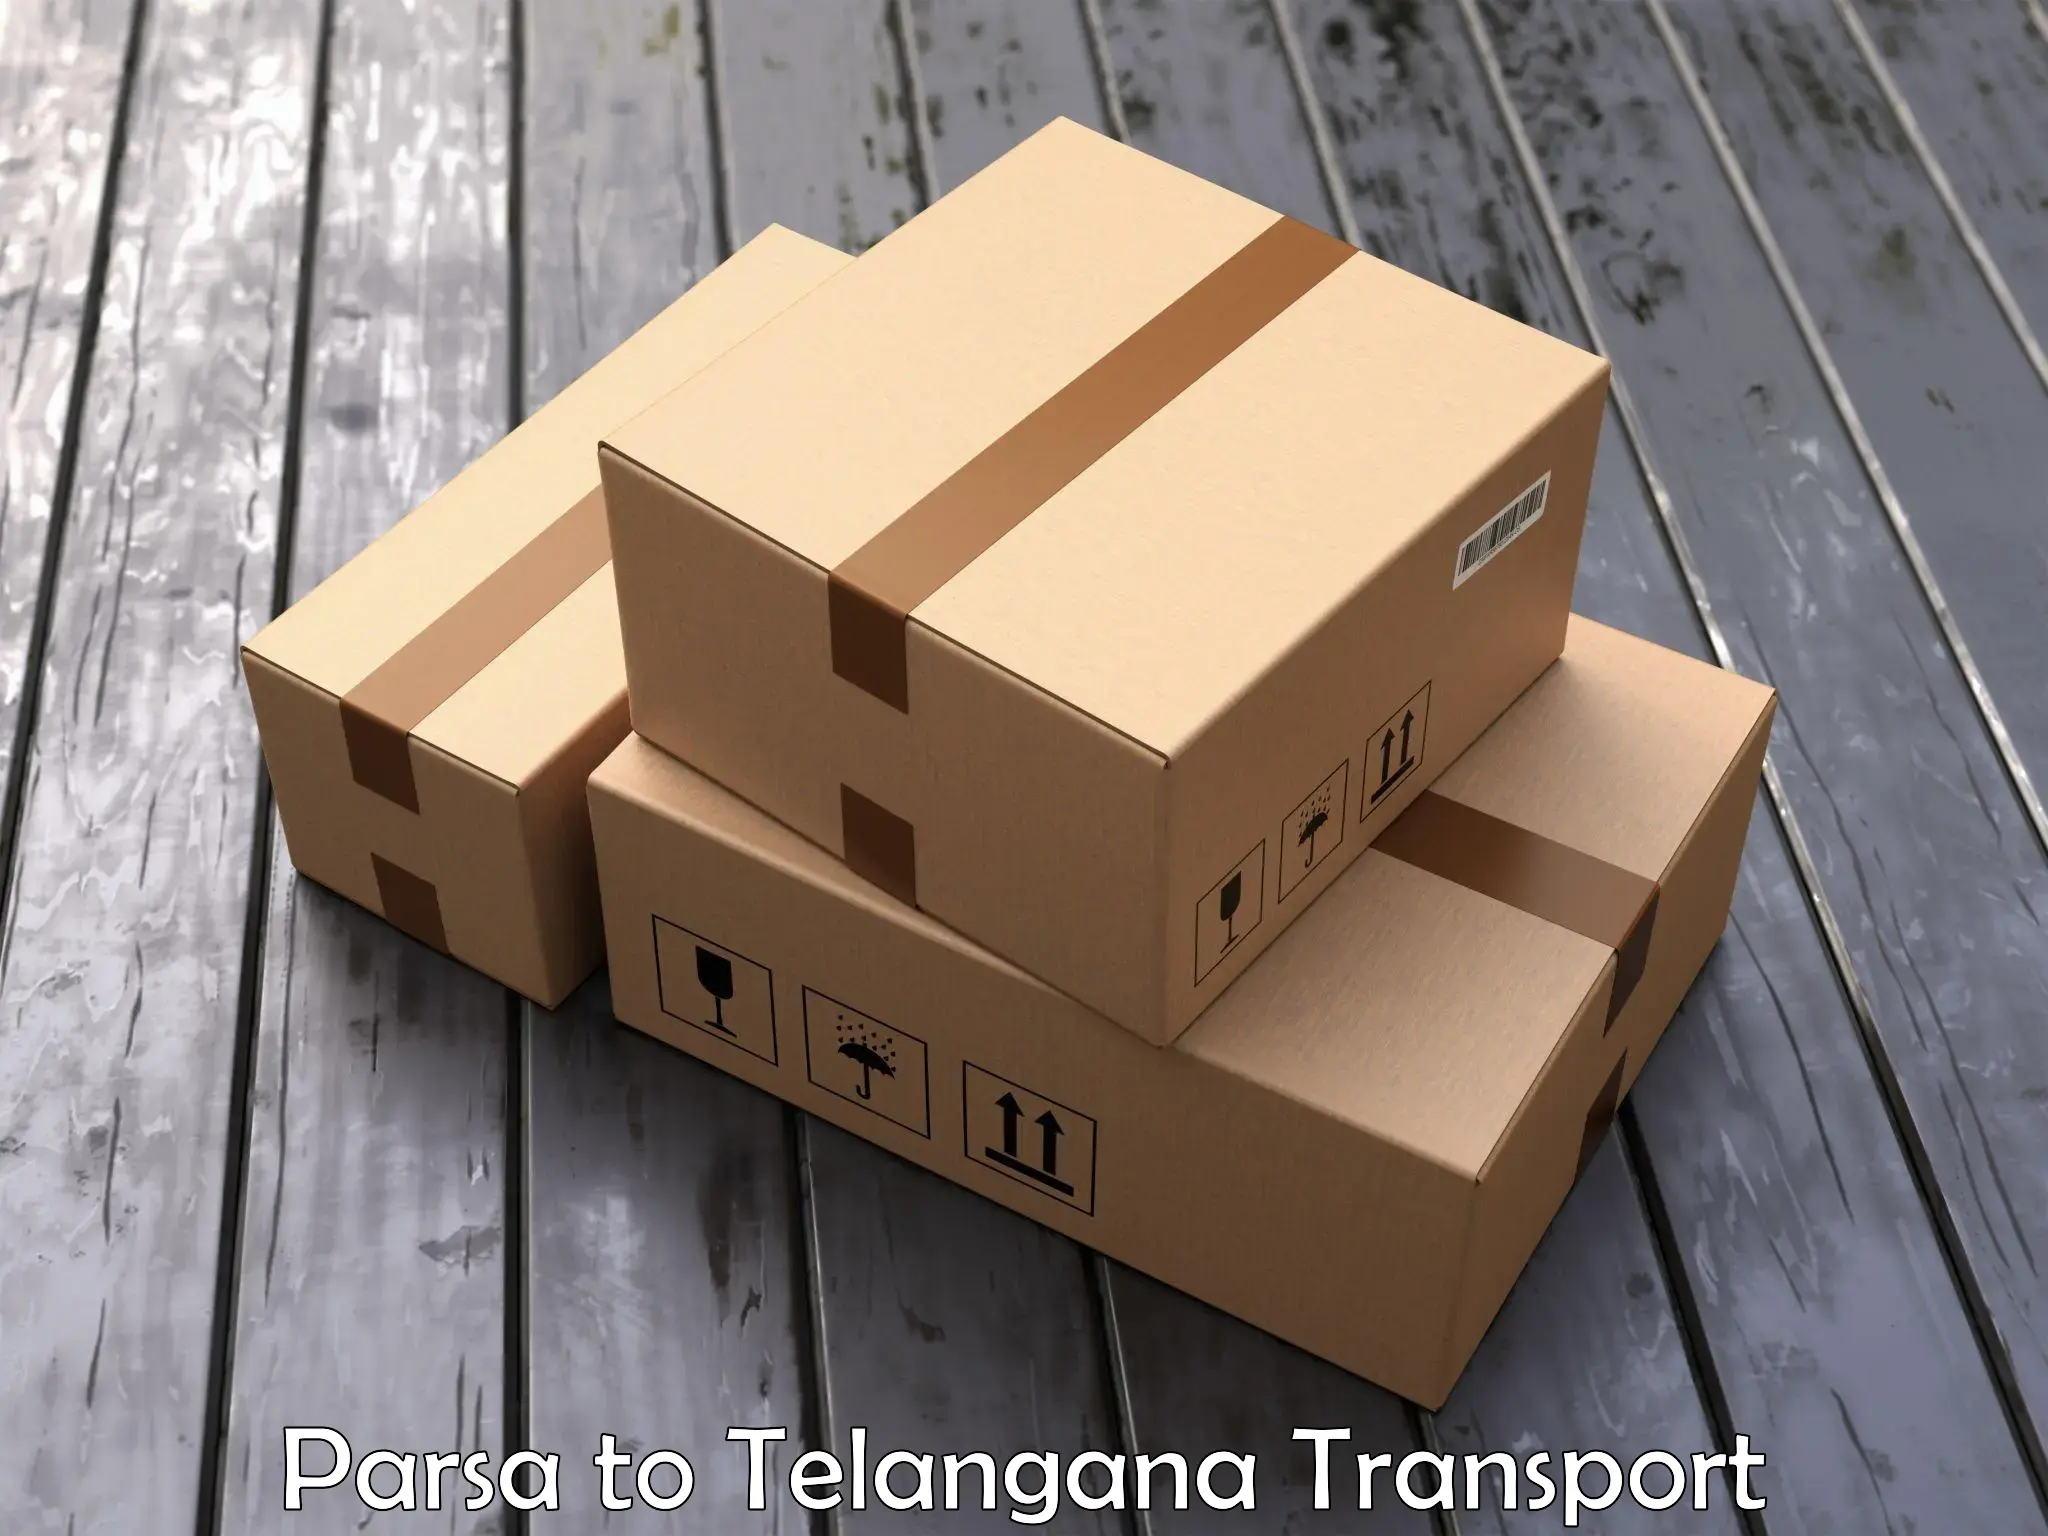 Part load transport service in India Parsa to Hyderabad